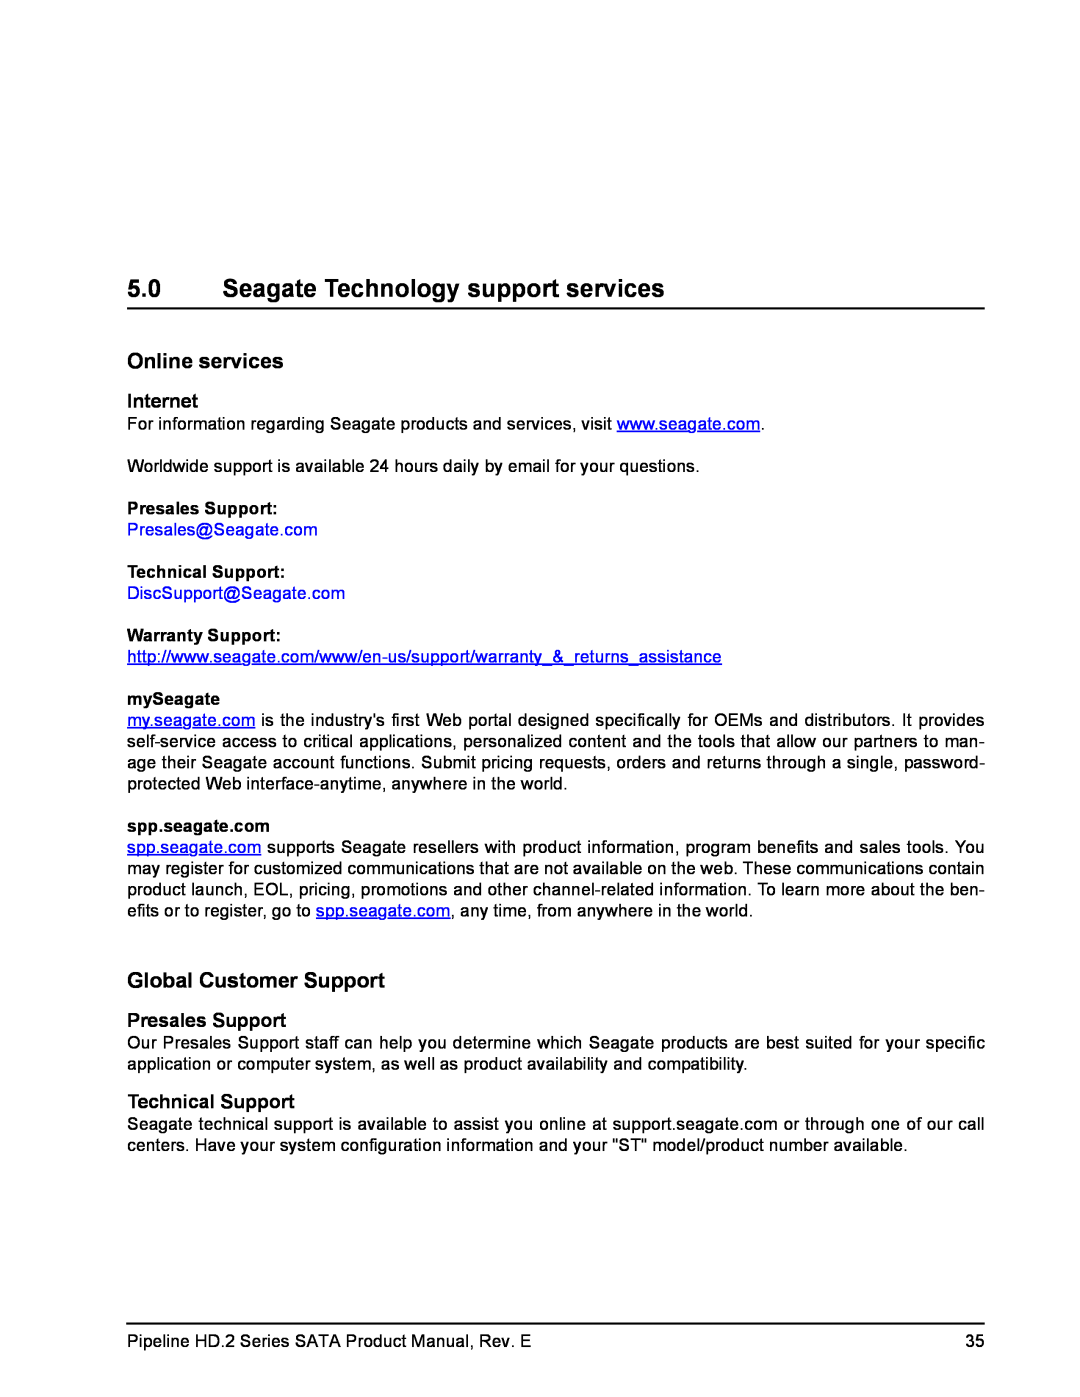 Seagate ST3320413CS Seagate Technology support services, Online services, Global Customer Support, Internet, mySeagate 